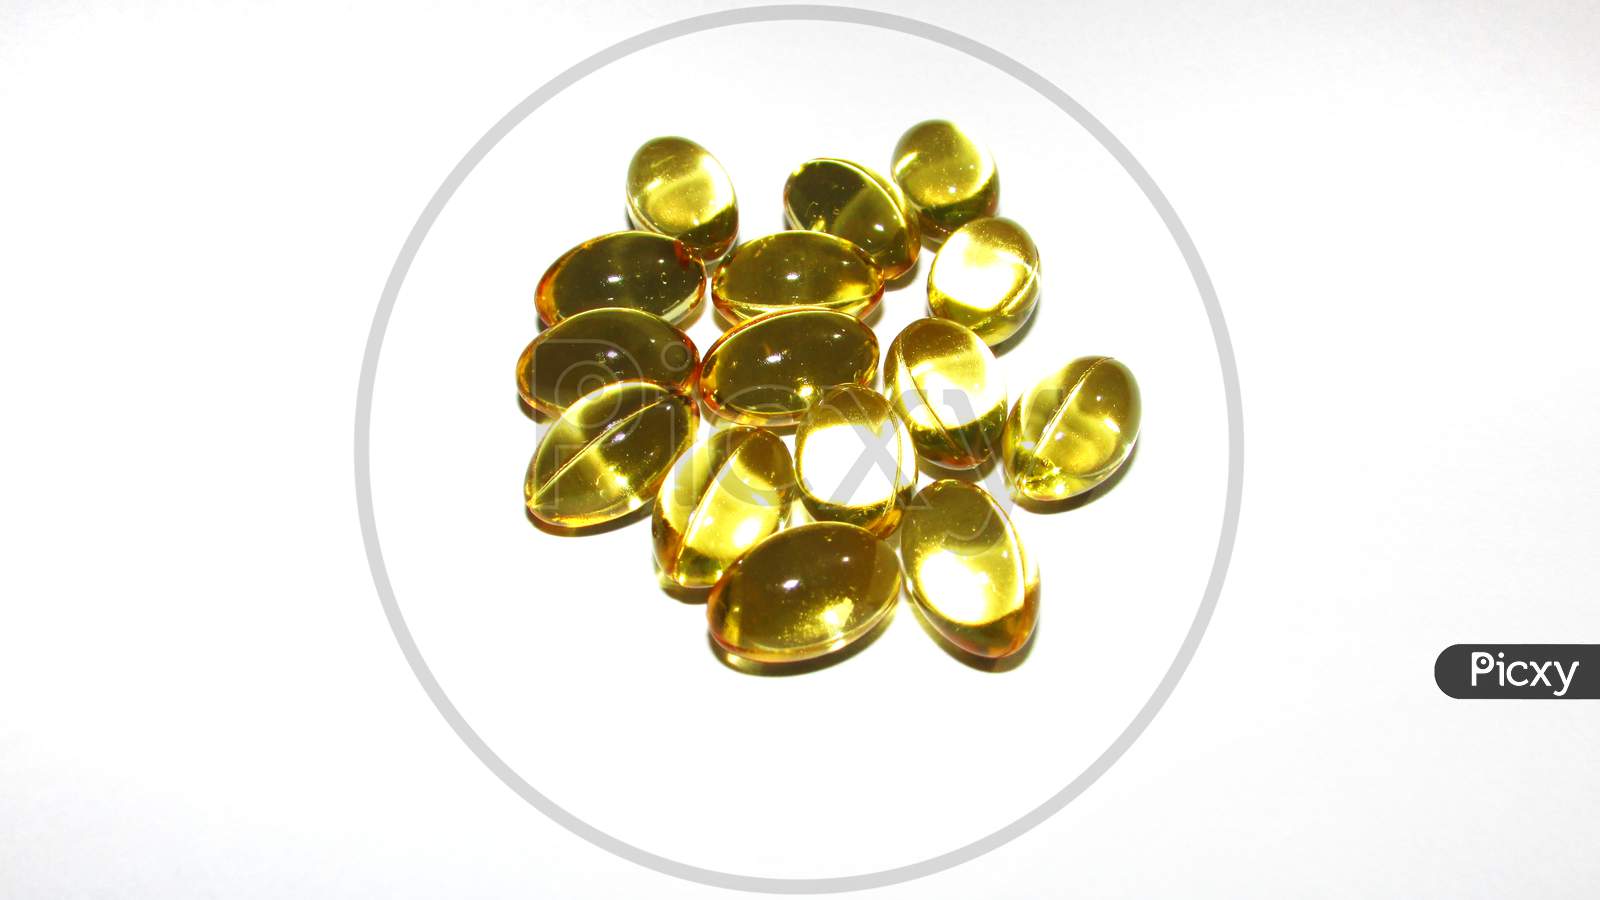 Cod liver oil  or fish oil gel capsules  on white background.